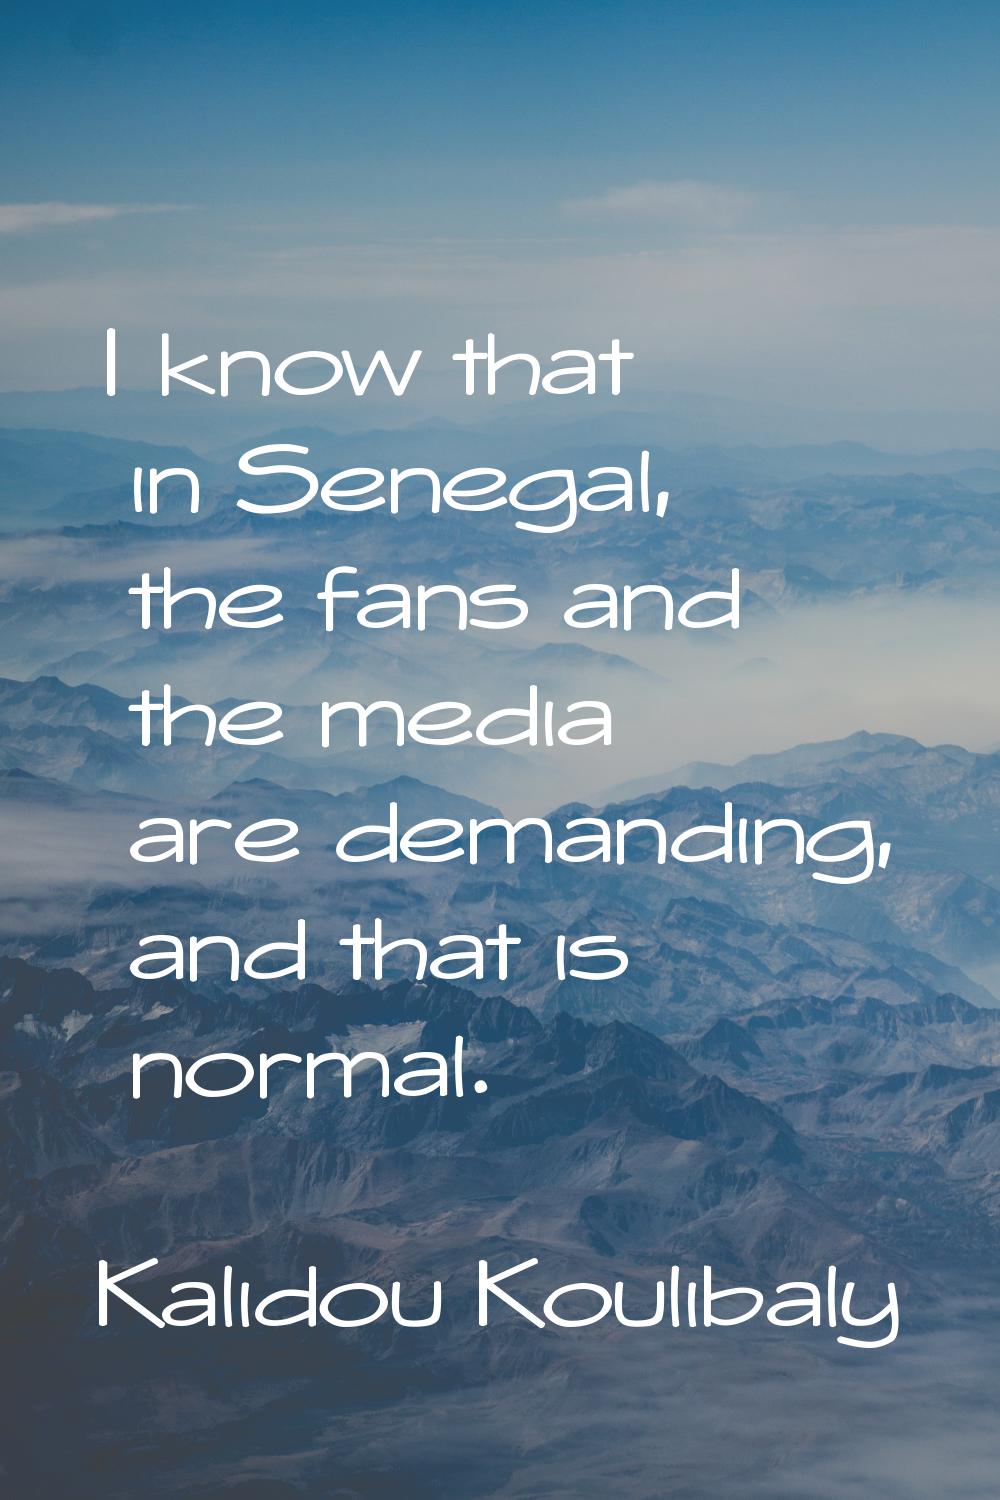 I know that in Senegal, the fans and the media are demanding, and that is normal.